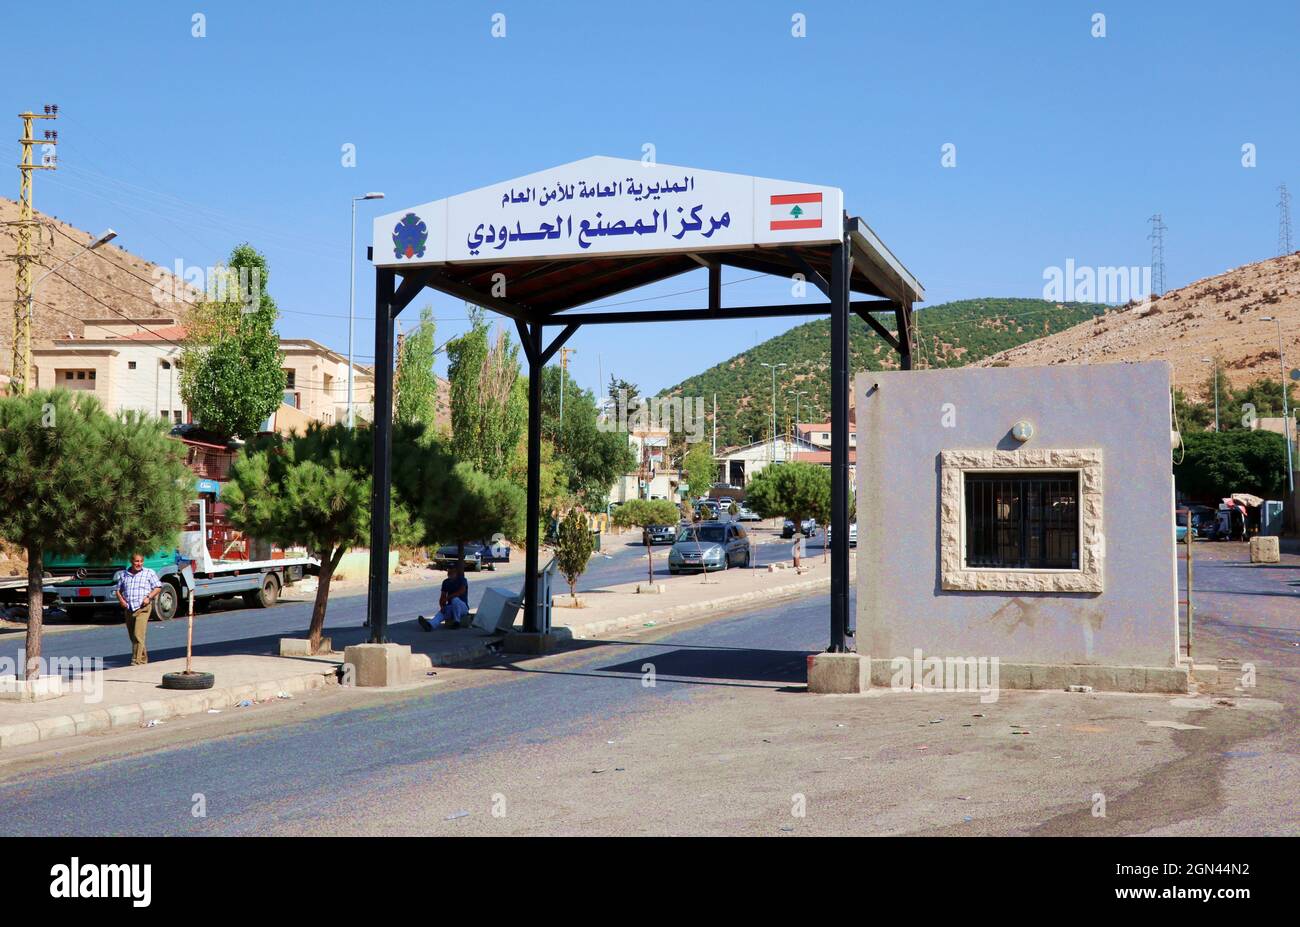 Masnaa border crossing checkpoint, Majdal Anjar, Bekaa Governorate, Lebanon, seen on September 21, 2021. Masnaa is an international authorized border crossing station between Lebanon and Syria. Lebanon has four official crossing checkpoints on Syrian border: Arida, Aboudieh, Ka'a and Masna'a. The Lebanon/Syria border is 394 km (245 miles) long and runs from the Mediterranean coast in the North to the tripartite border with Israel in the South. The border region with Syria is widely affected by smuggling, illegal entries and the spillovers from the Syrian Civil War. (Elisa Gestri/ Sipa USA) Stock Photo